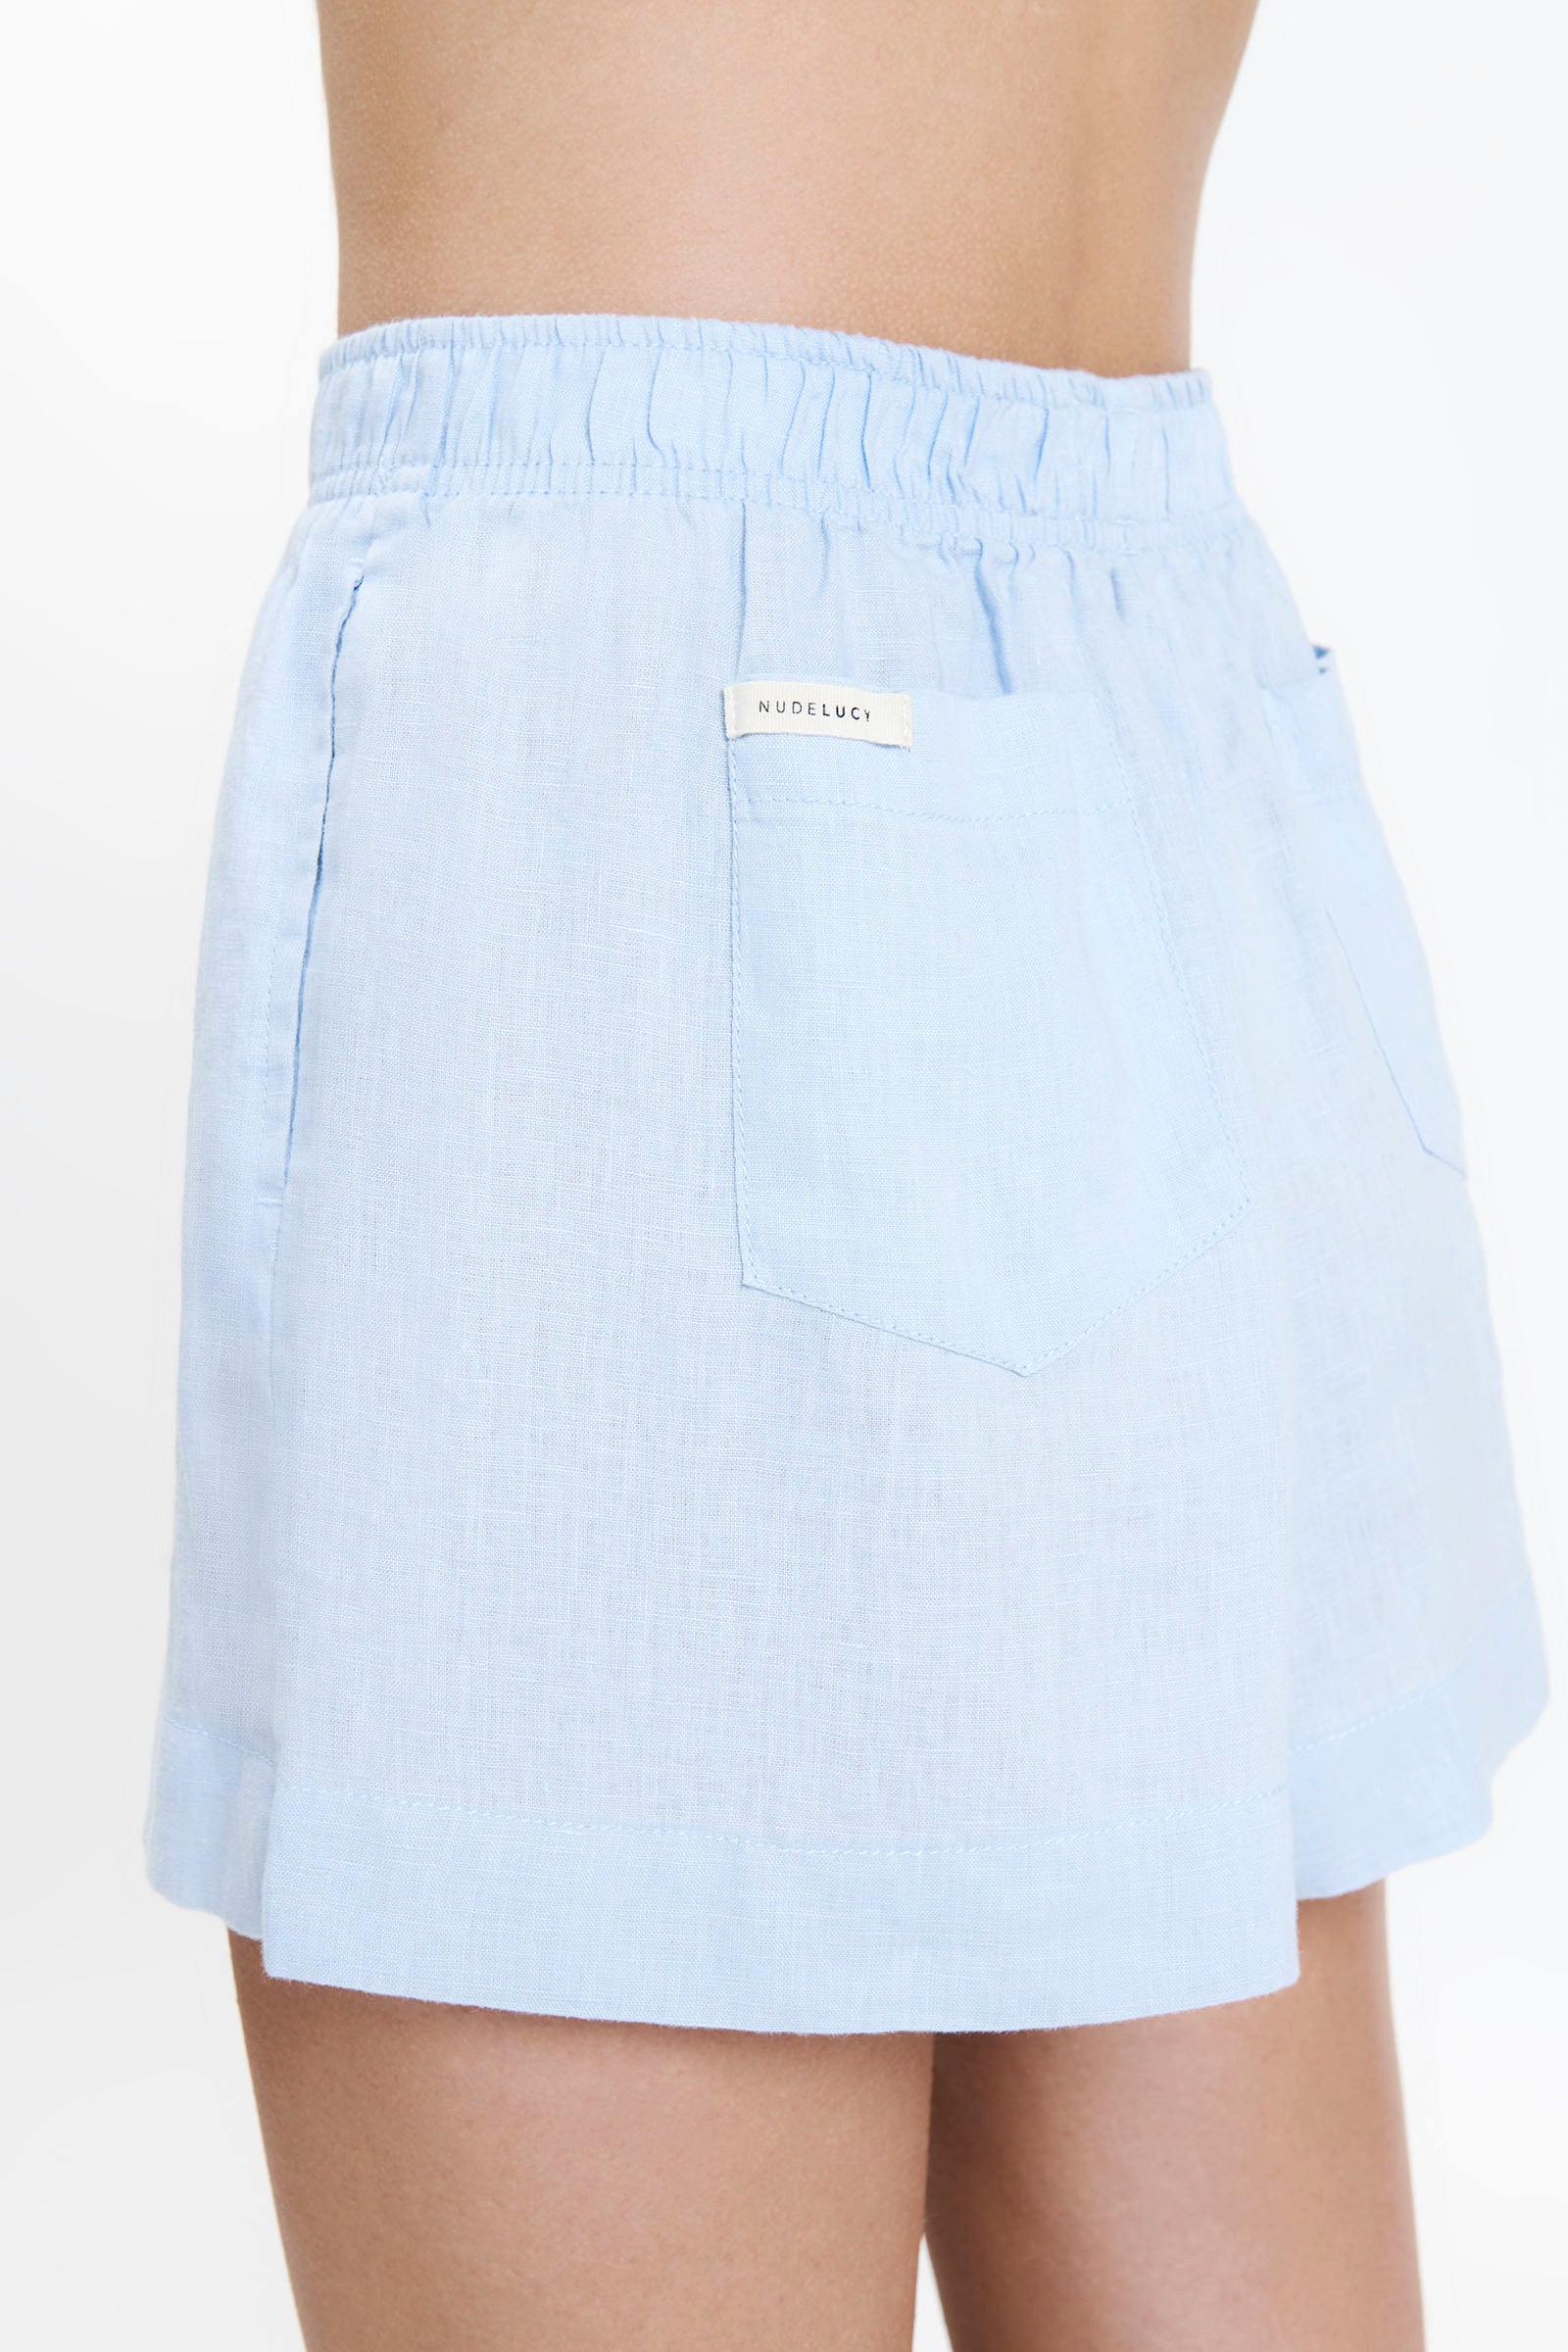 Nude Lucy Lounge Linen Short in a Blue Sky Colour